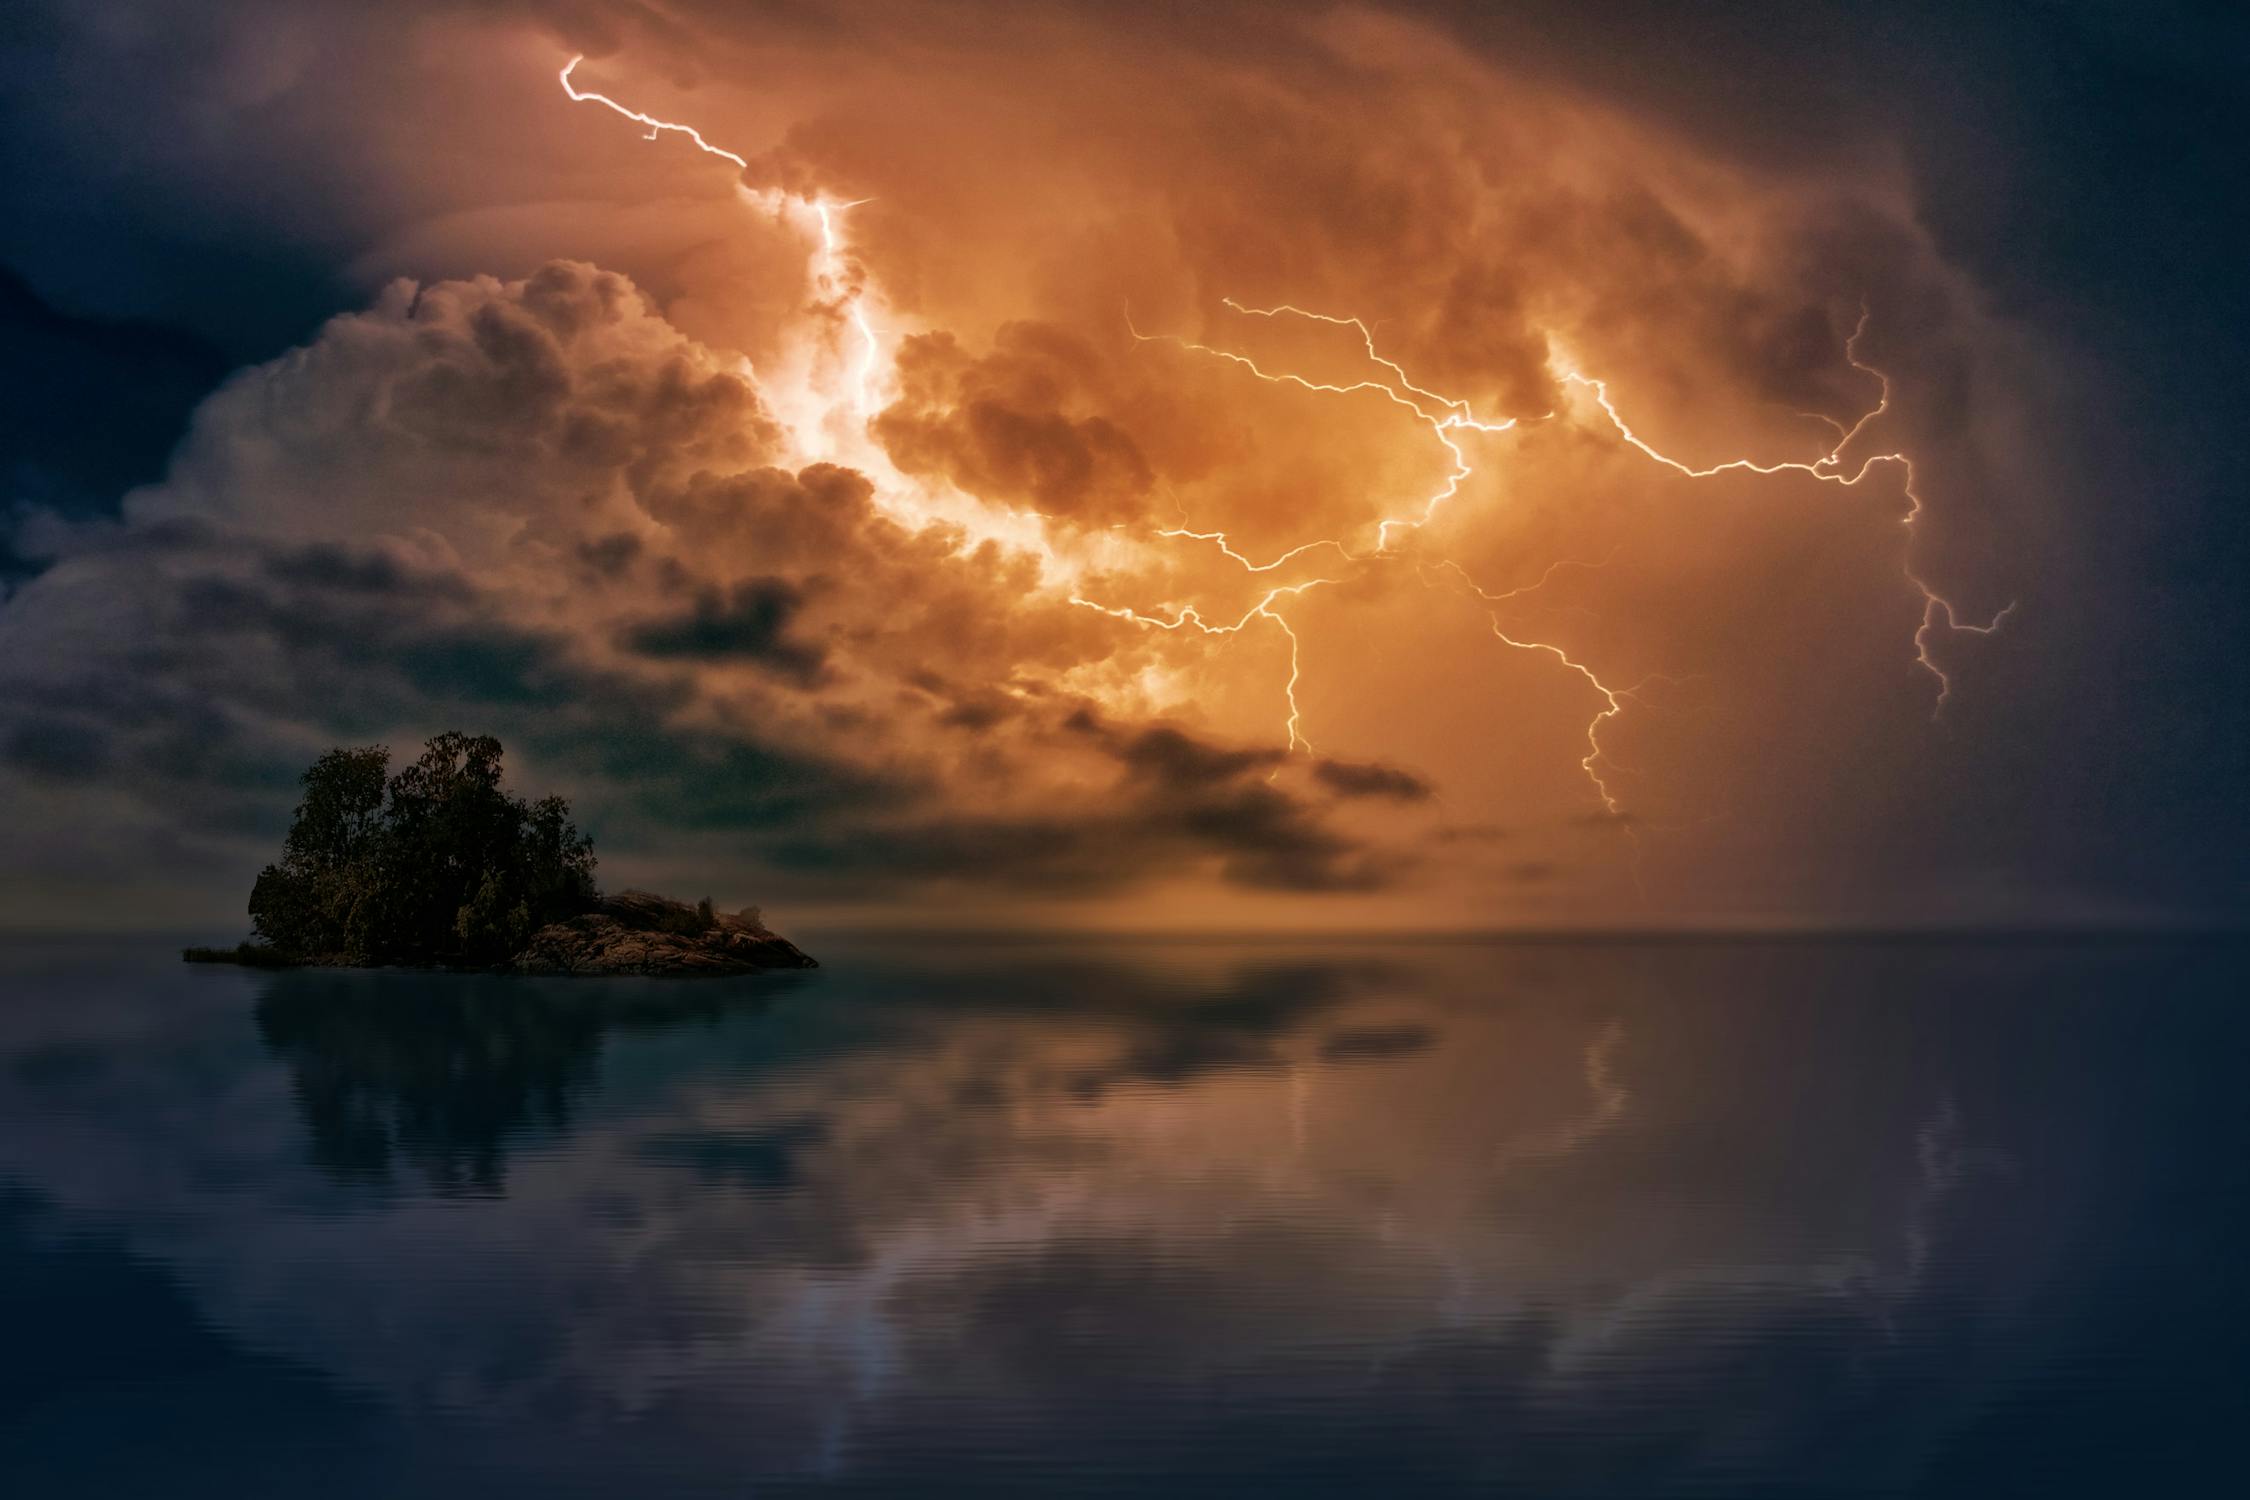 Thunder and Lightning Photo by Johannes Plenio from Pexels: https://www.pexels.com/photo/blue-body-of-water-with-orange-thunder-1102915/